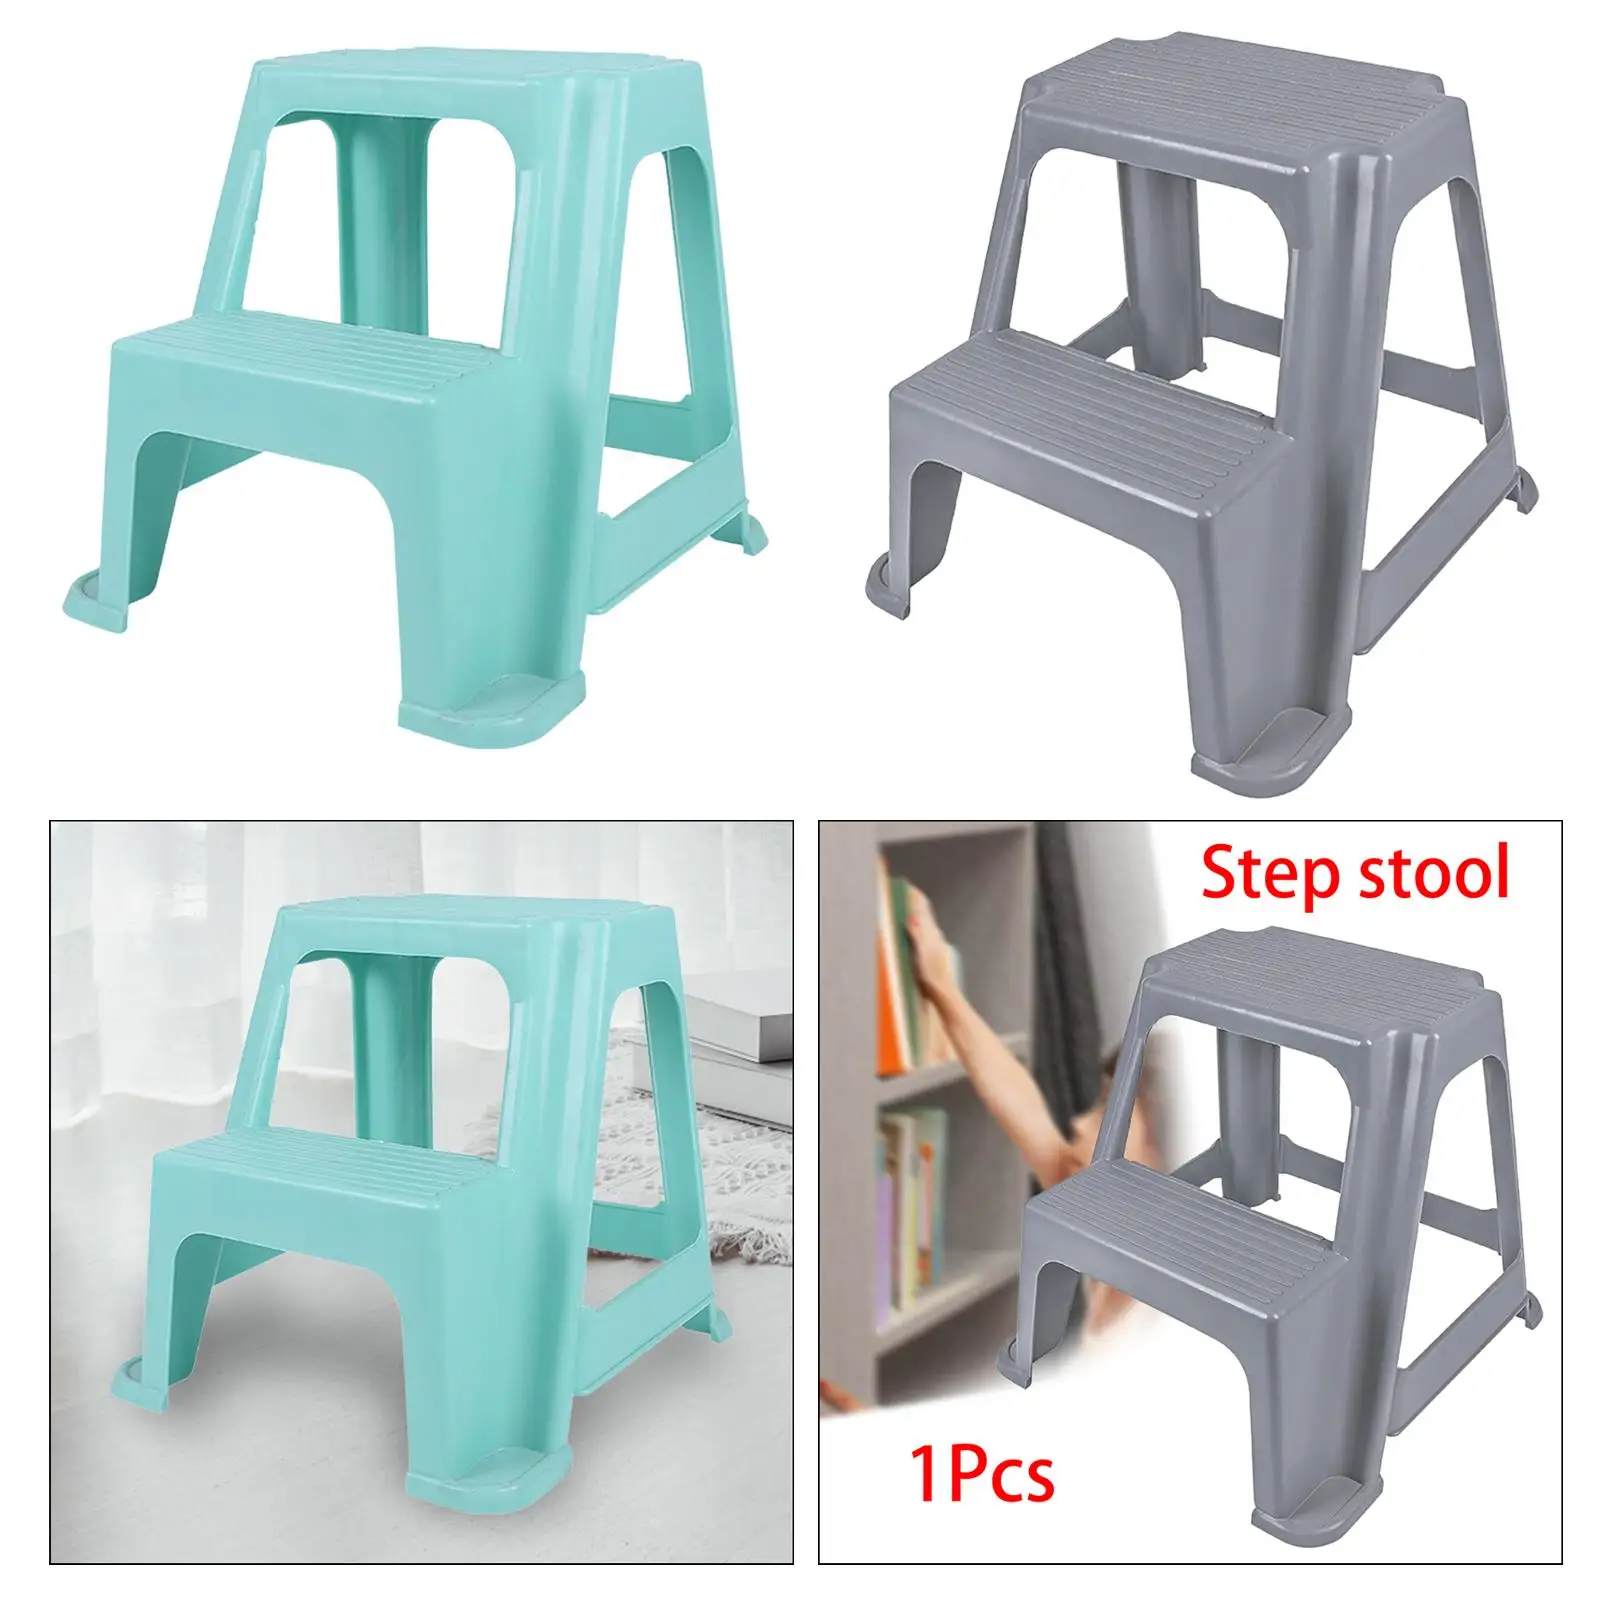 2 Step Stool Lightweight Stepping Stool Two Step Stool for Kids Adults